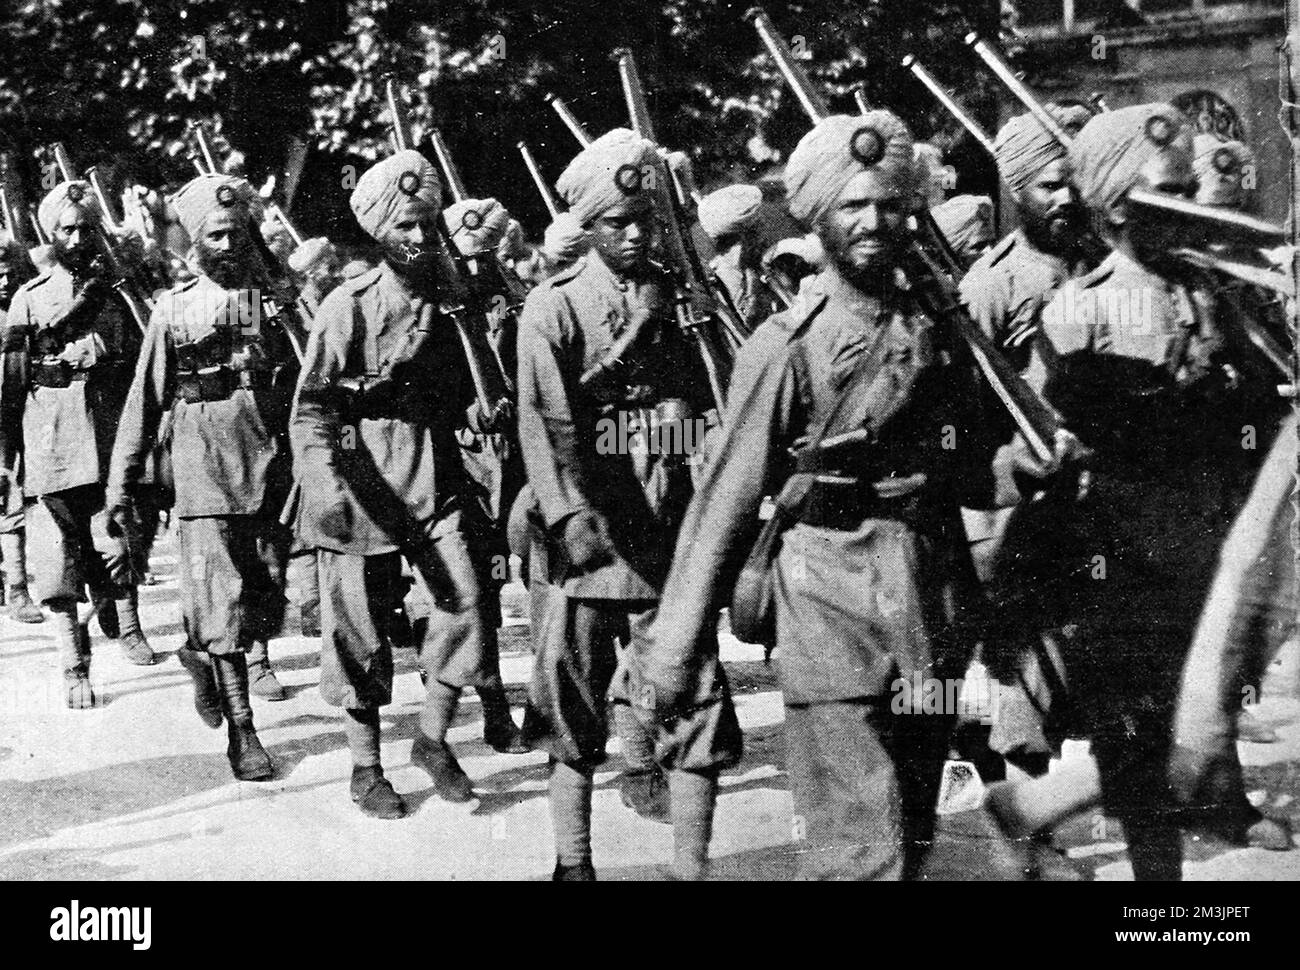 Indian troops on the march in September 1914. The Sikhs are identified by a stell quoit, the old-time national battlefield weapon of the Sikhs, in the Sepoy's turbans. In August 1914, as the German Army advanced through France and Belgium, more Allied troops were desperately needed for the Western Front - and the Indian Army seemed the obvious source. Stock Photo